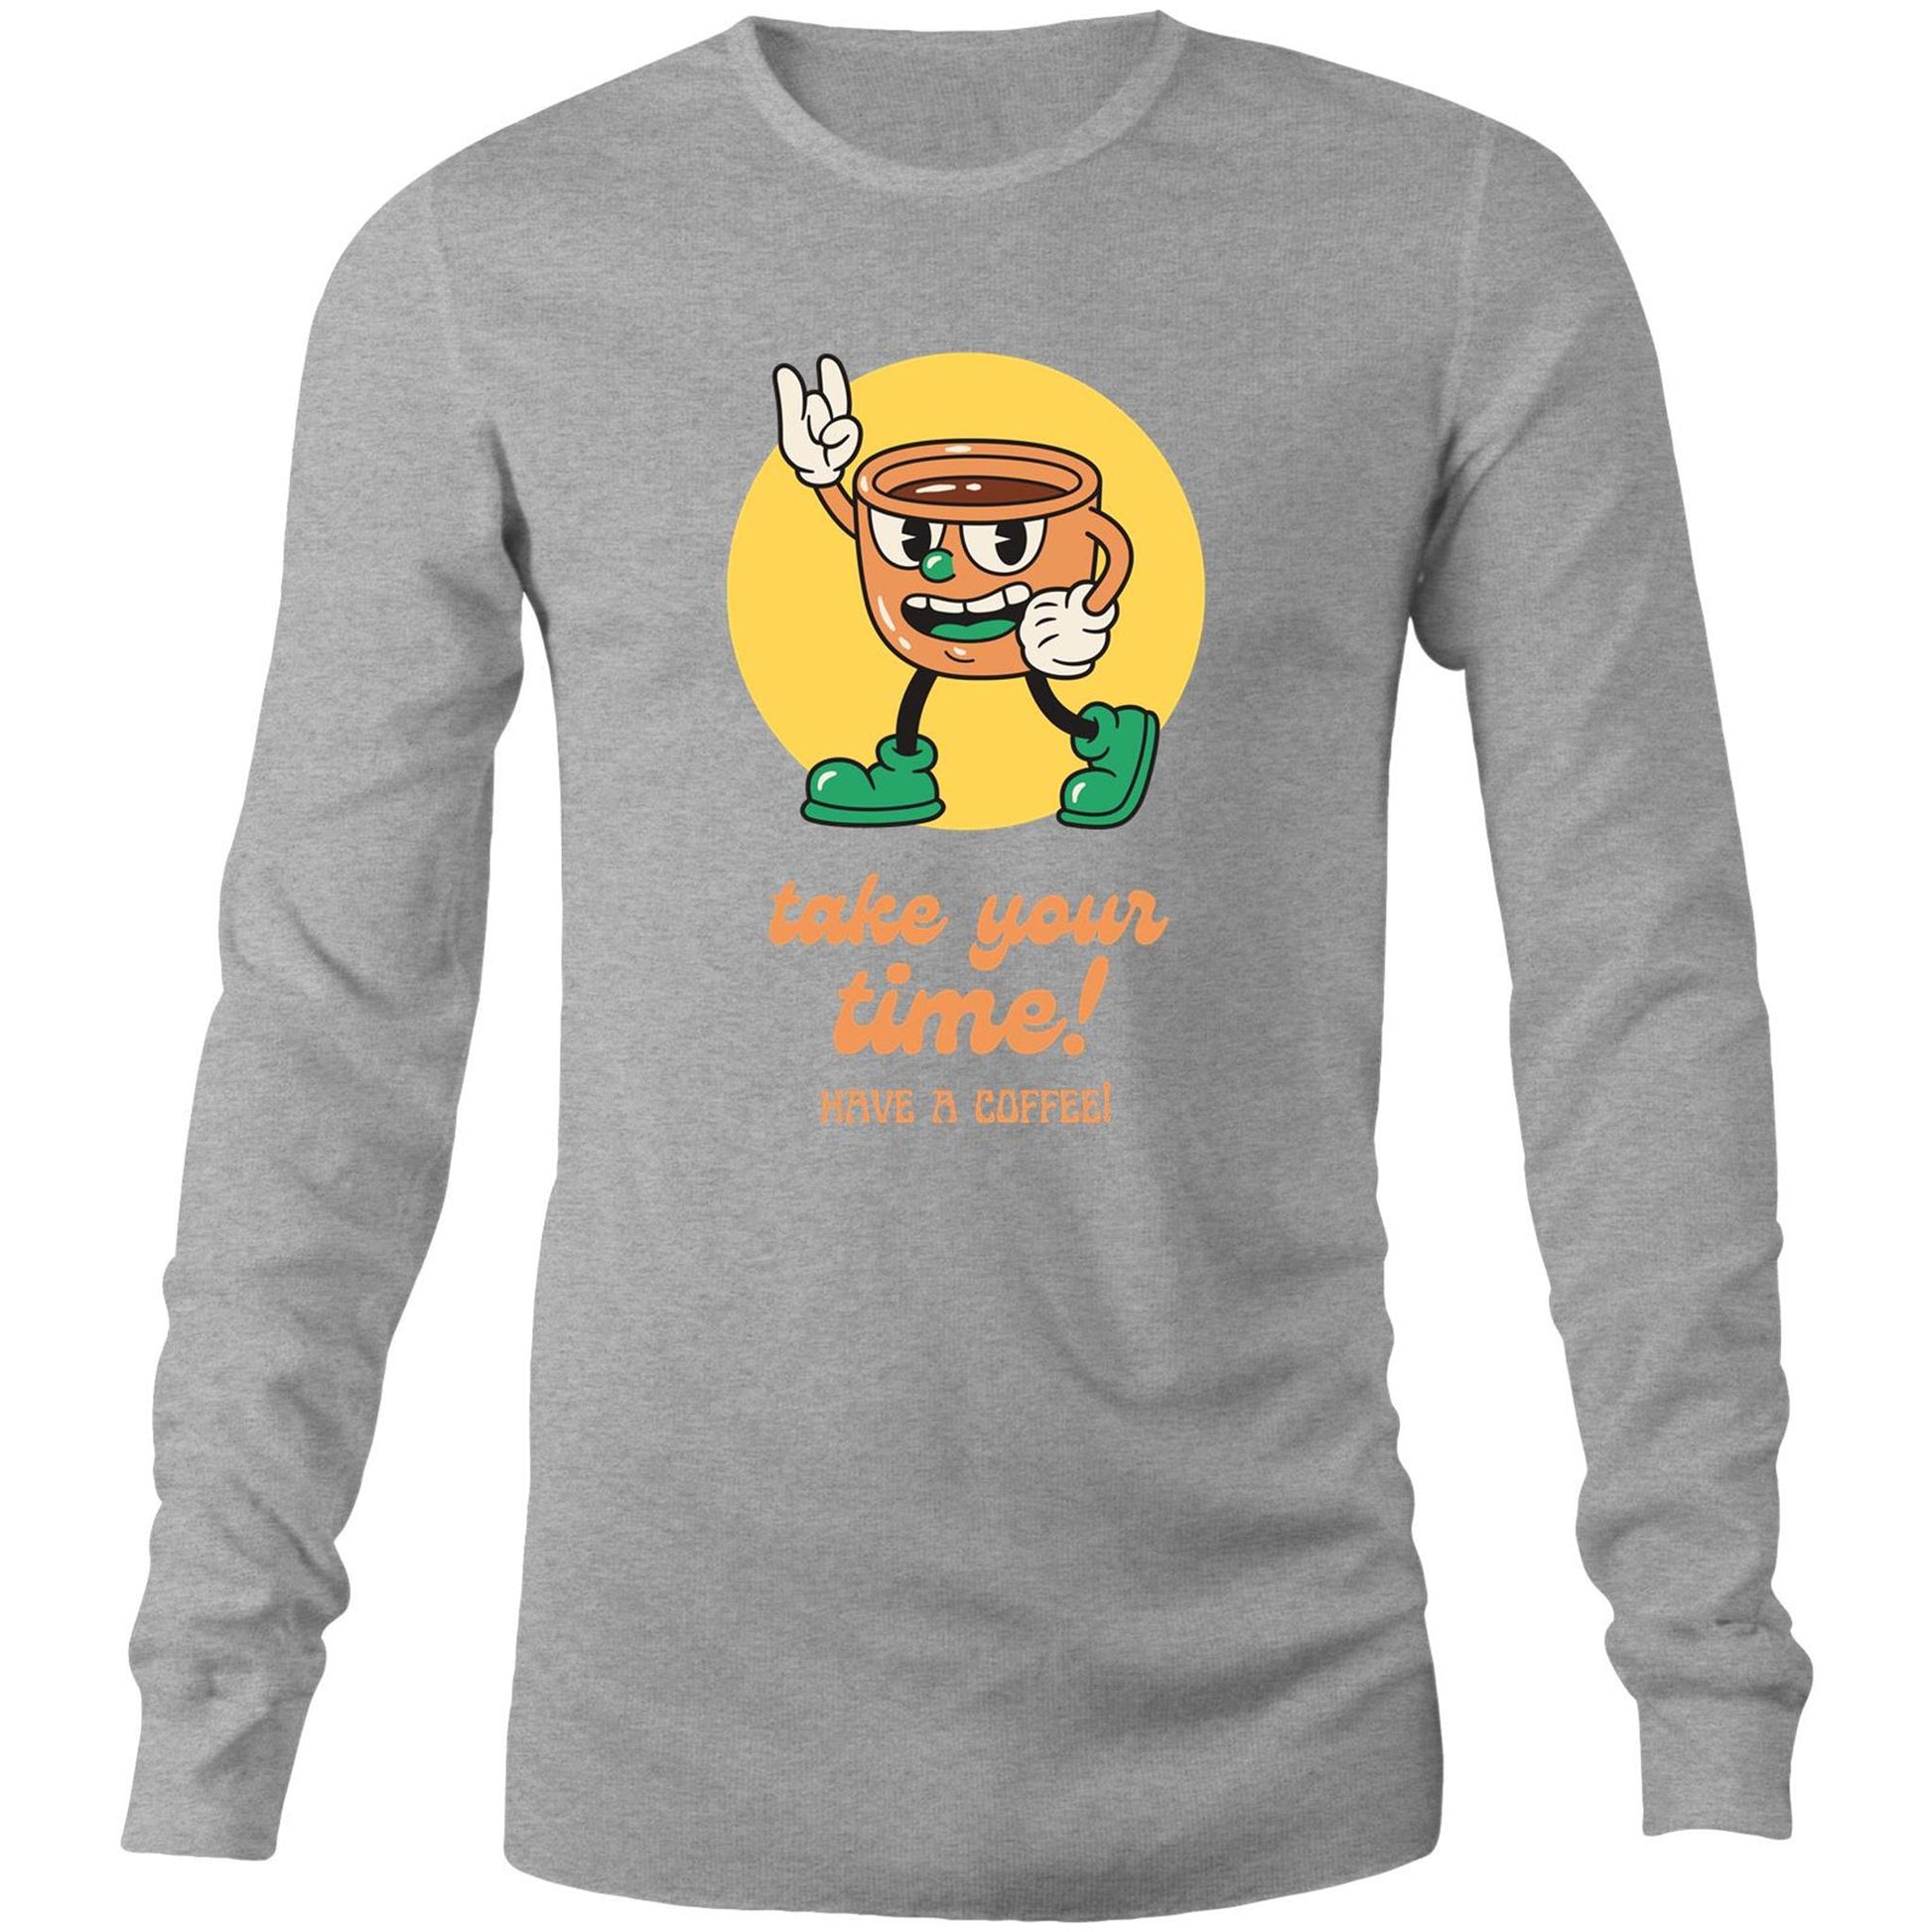 Take Your Time, Have A Coffee - Long Sleeve T-Shirt Grey Marle Unisex Long Sleeve T-shirt Coffee